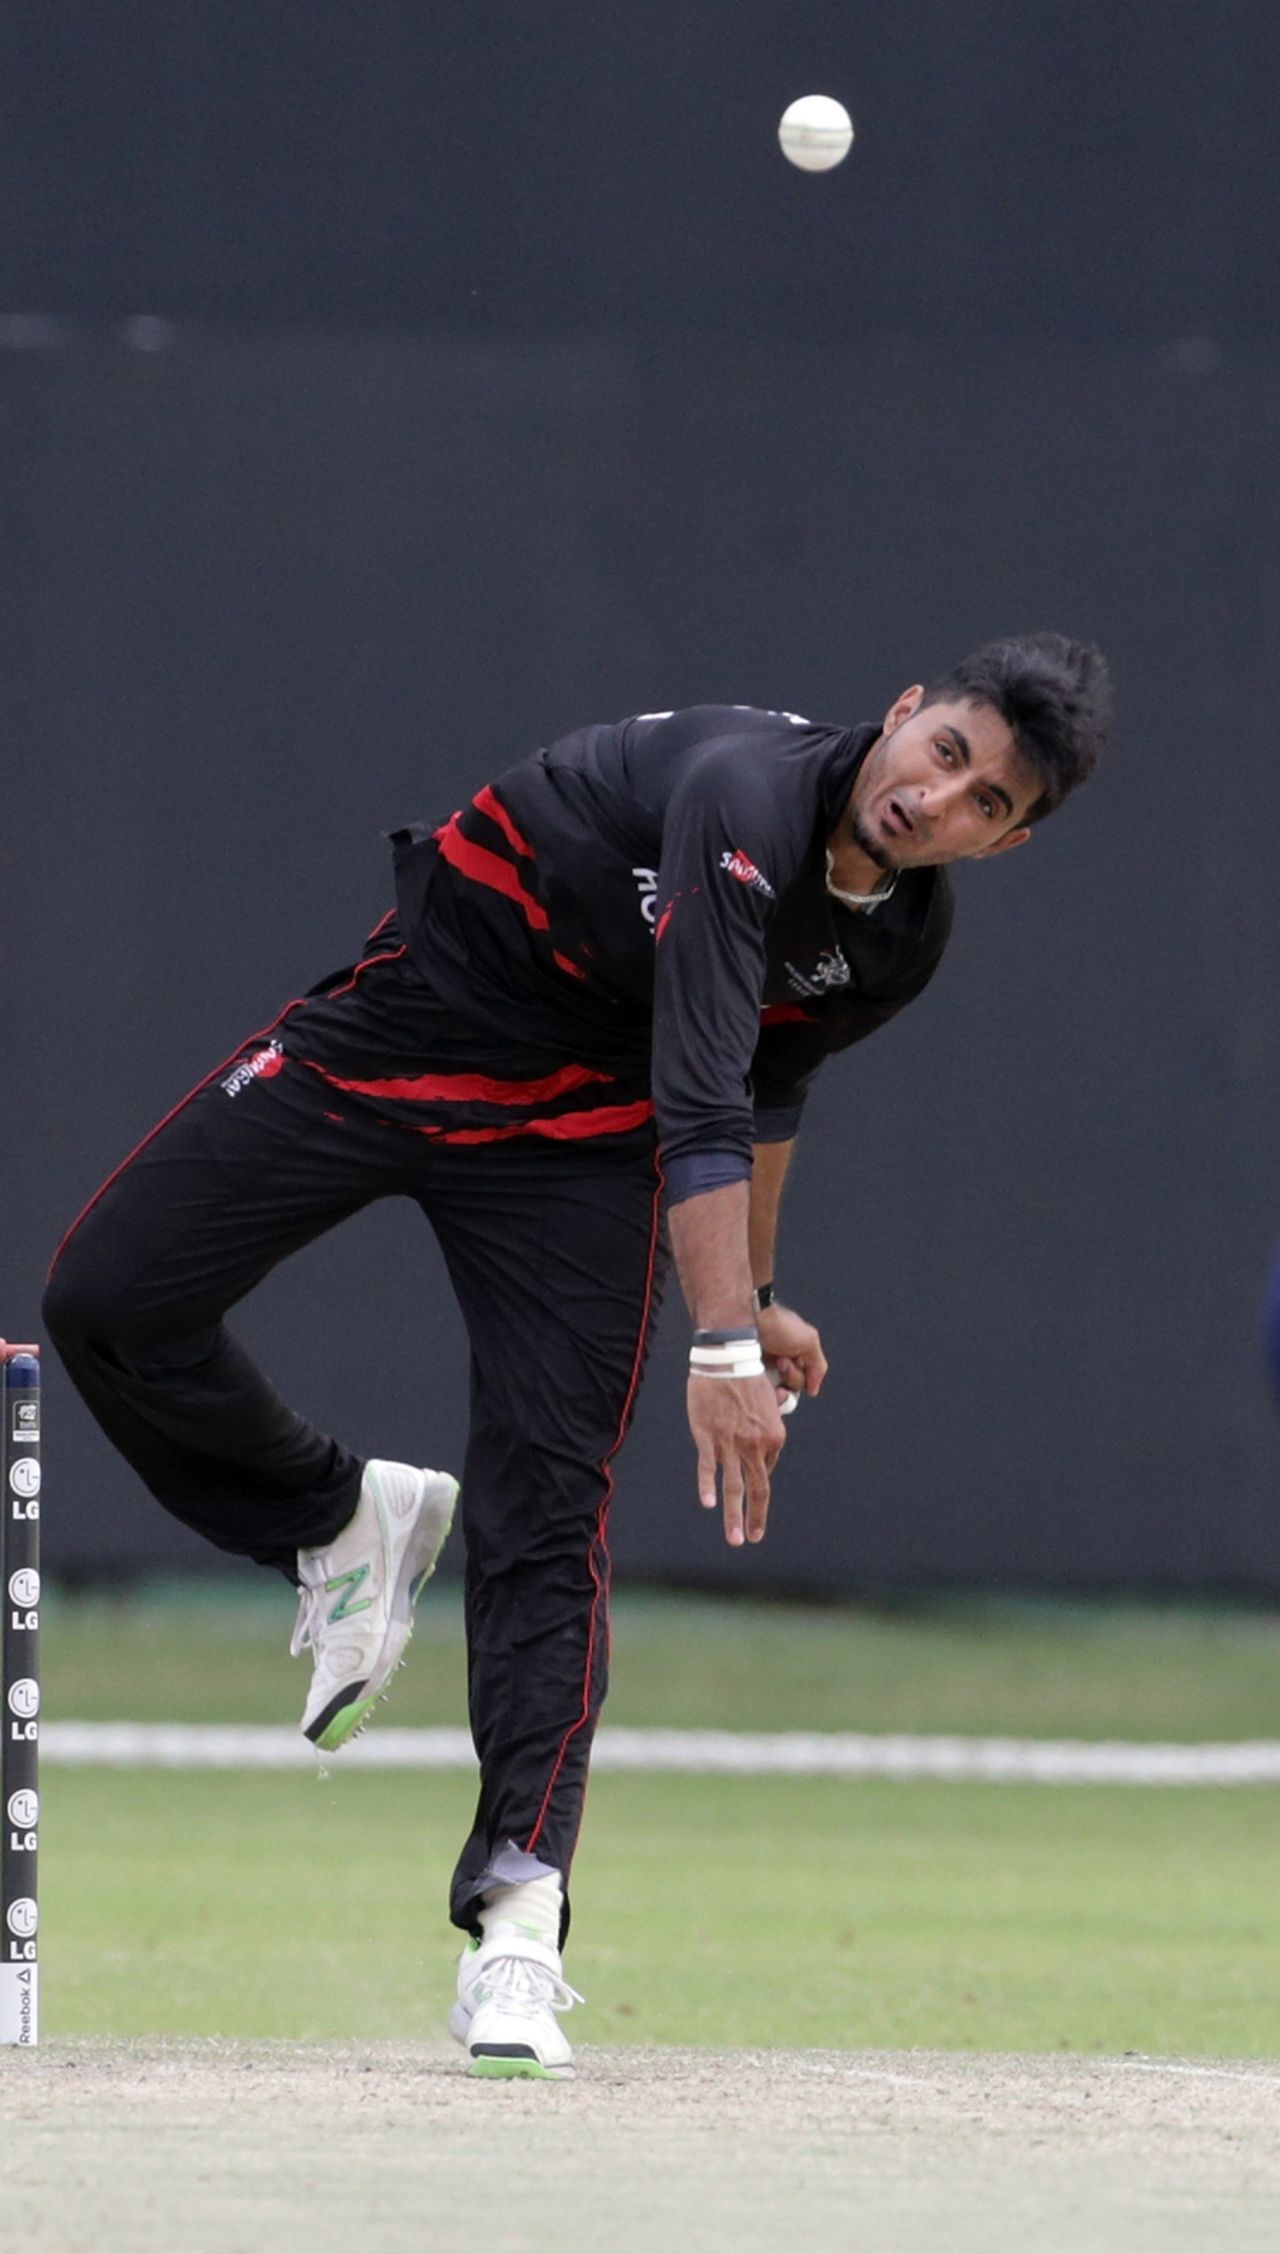 Nizakat Khan of Hong Kong comes in to bowl during ICC World Twenty20 Qualifier between Ireland and Hong Kong at the Zayed Cricket Stadium on November 24, 2013 in Abu Dhabi, United Arab Emirates. (Photo by Graham Crouch-IDI/IDI via Getty Images)
